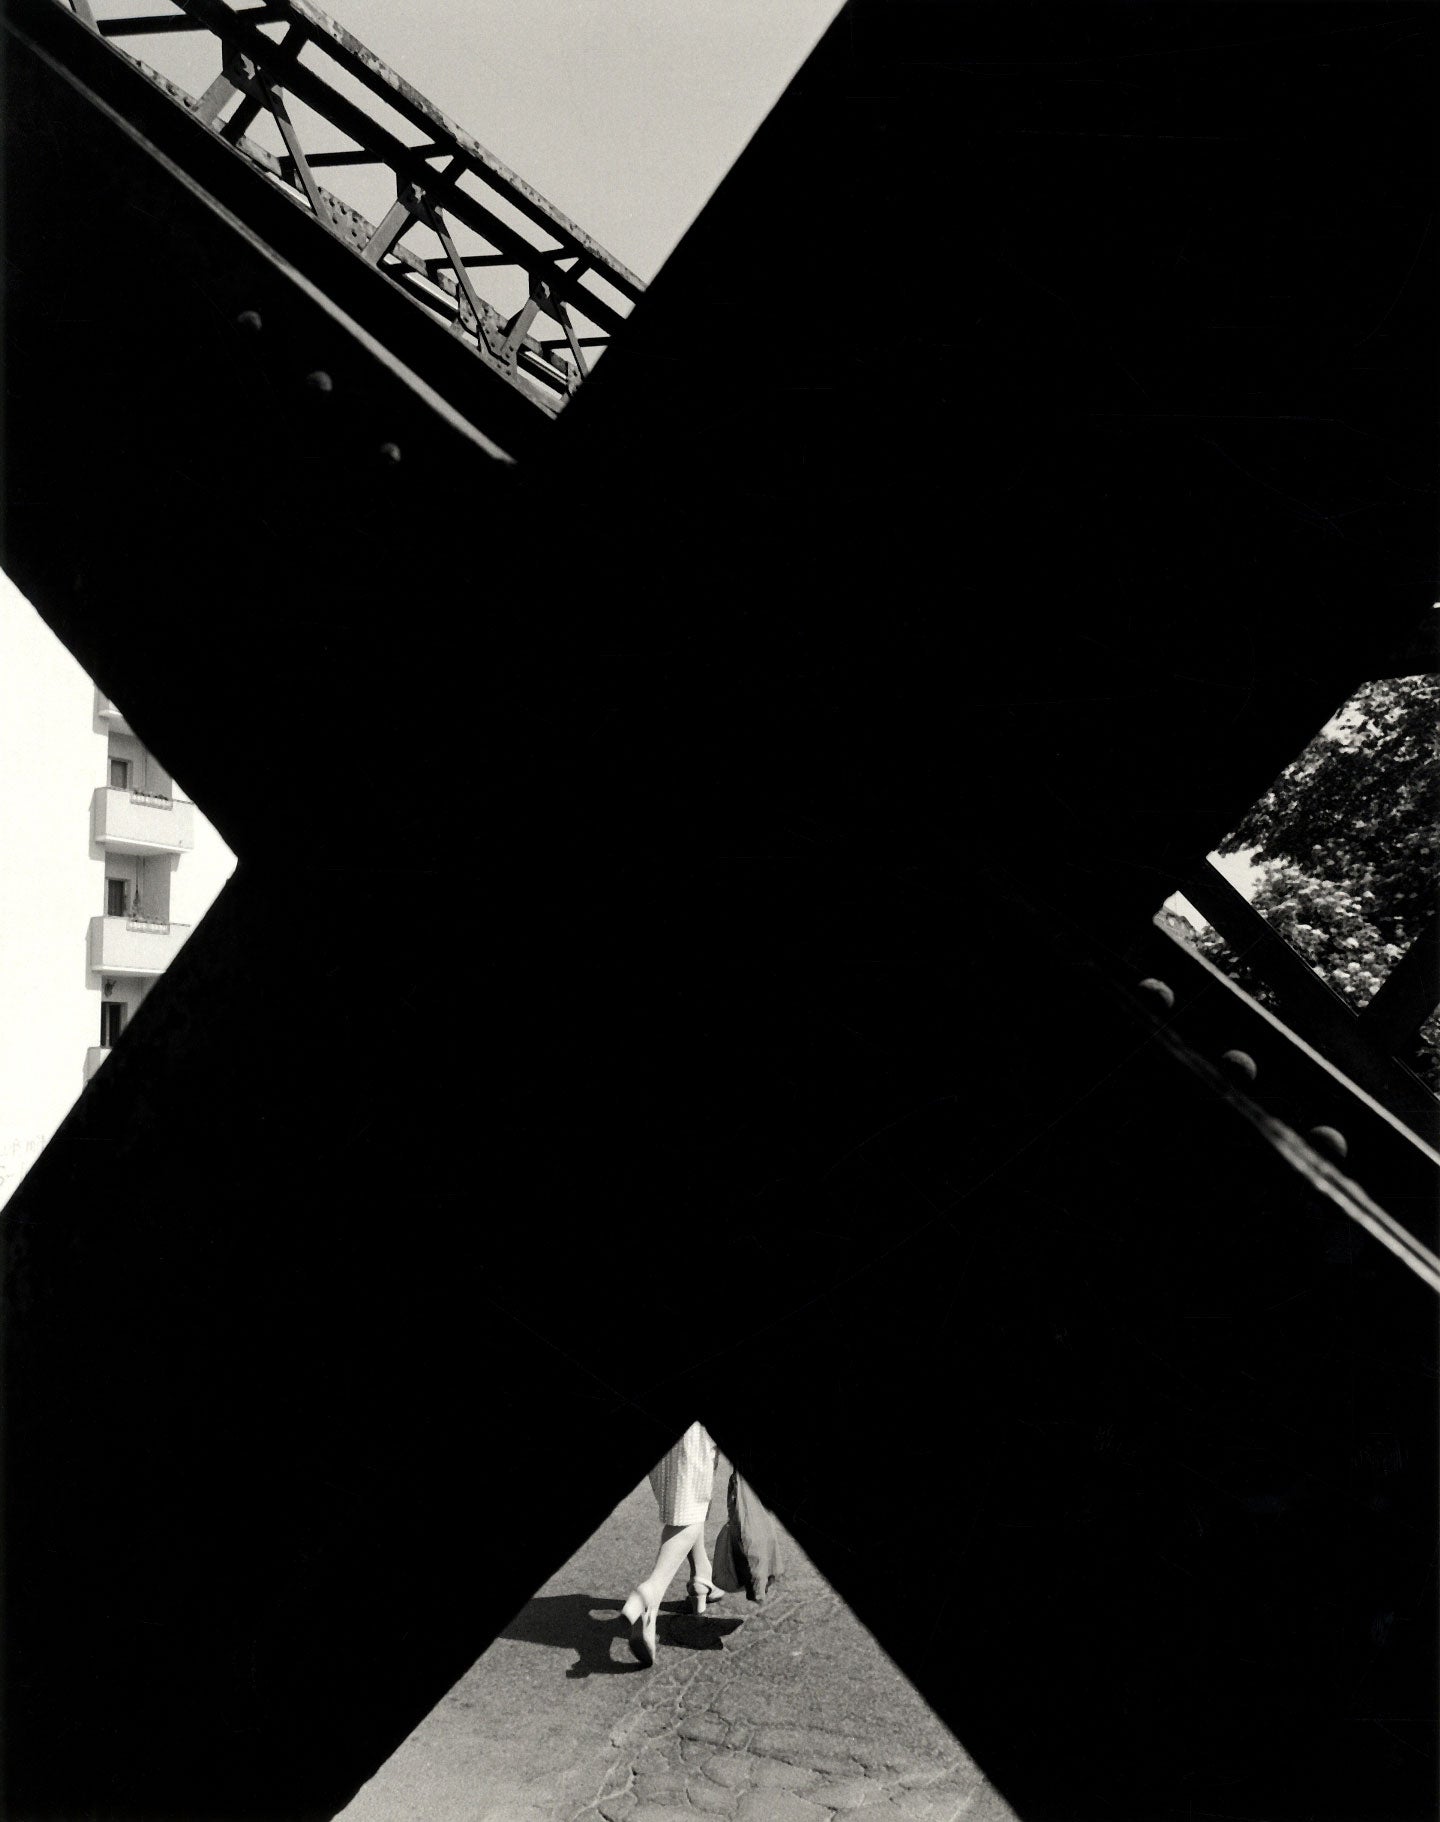 John Gossage: "Monumentenbricke, 1982" (from the series "Berlin in the Time of the Wall"), Limited Edition (Gelatin Silver Print)